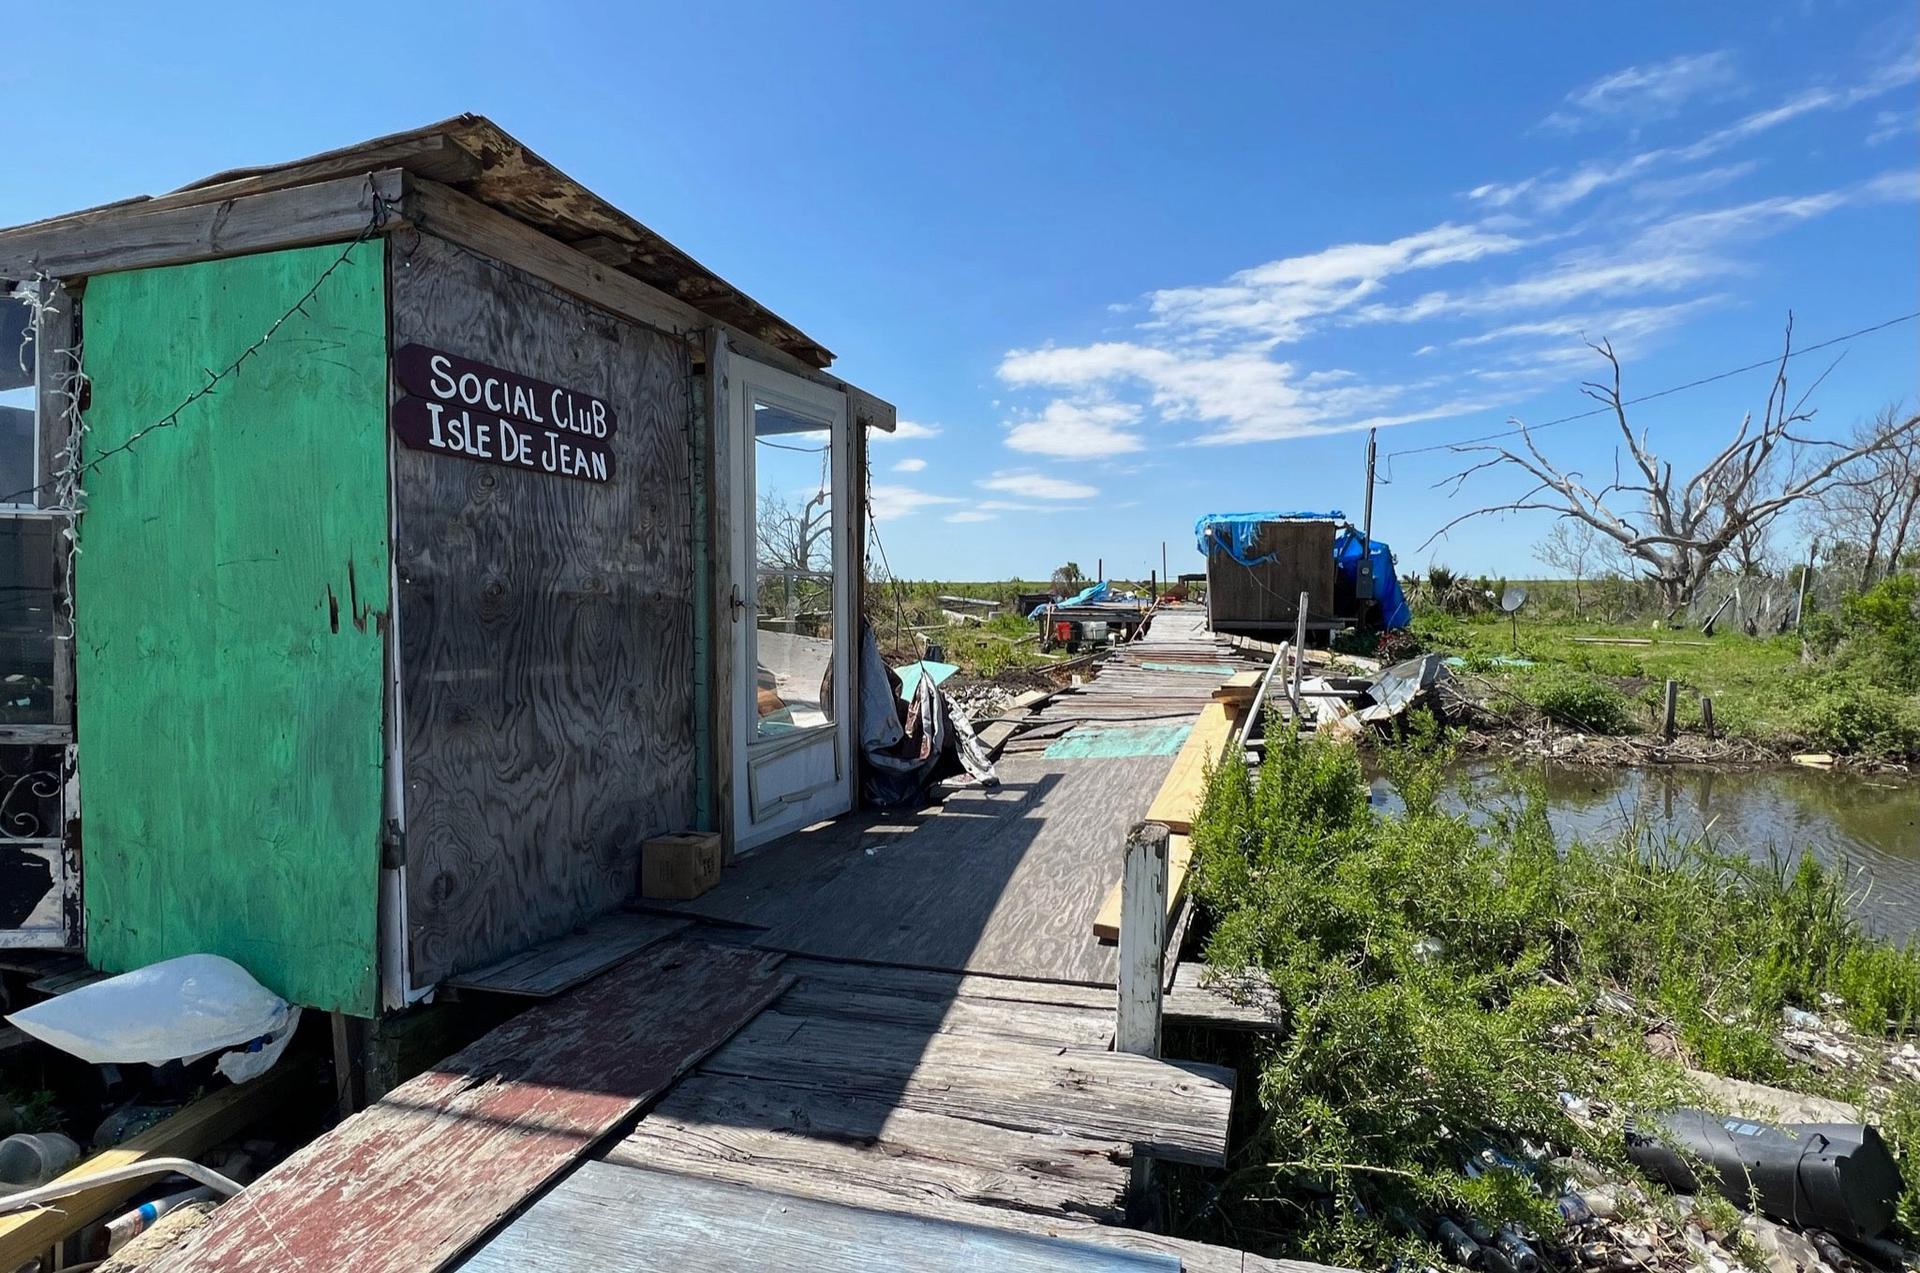 French-speaking Isle de Jean Charles, Louisiana, has abandoned dwellings are everywhere due to storms, erosion, and rising sea-levels.